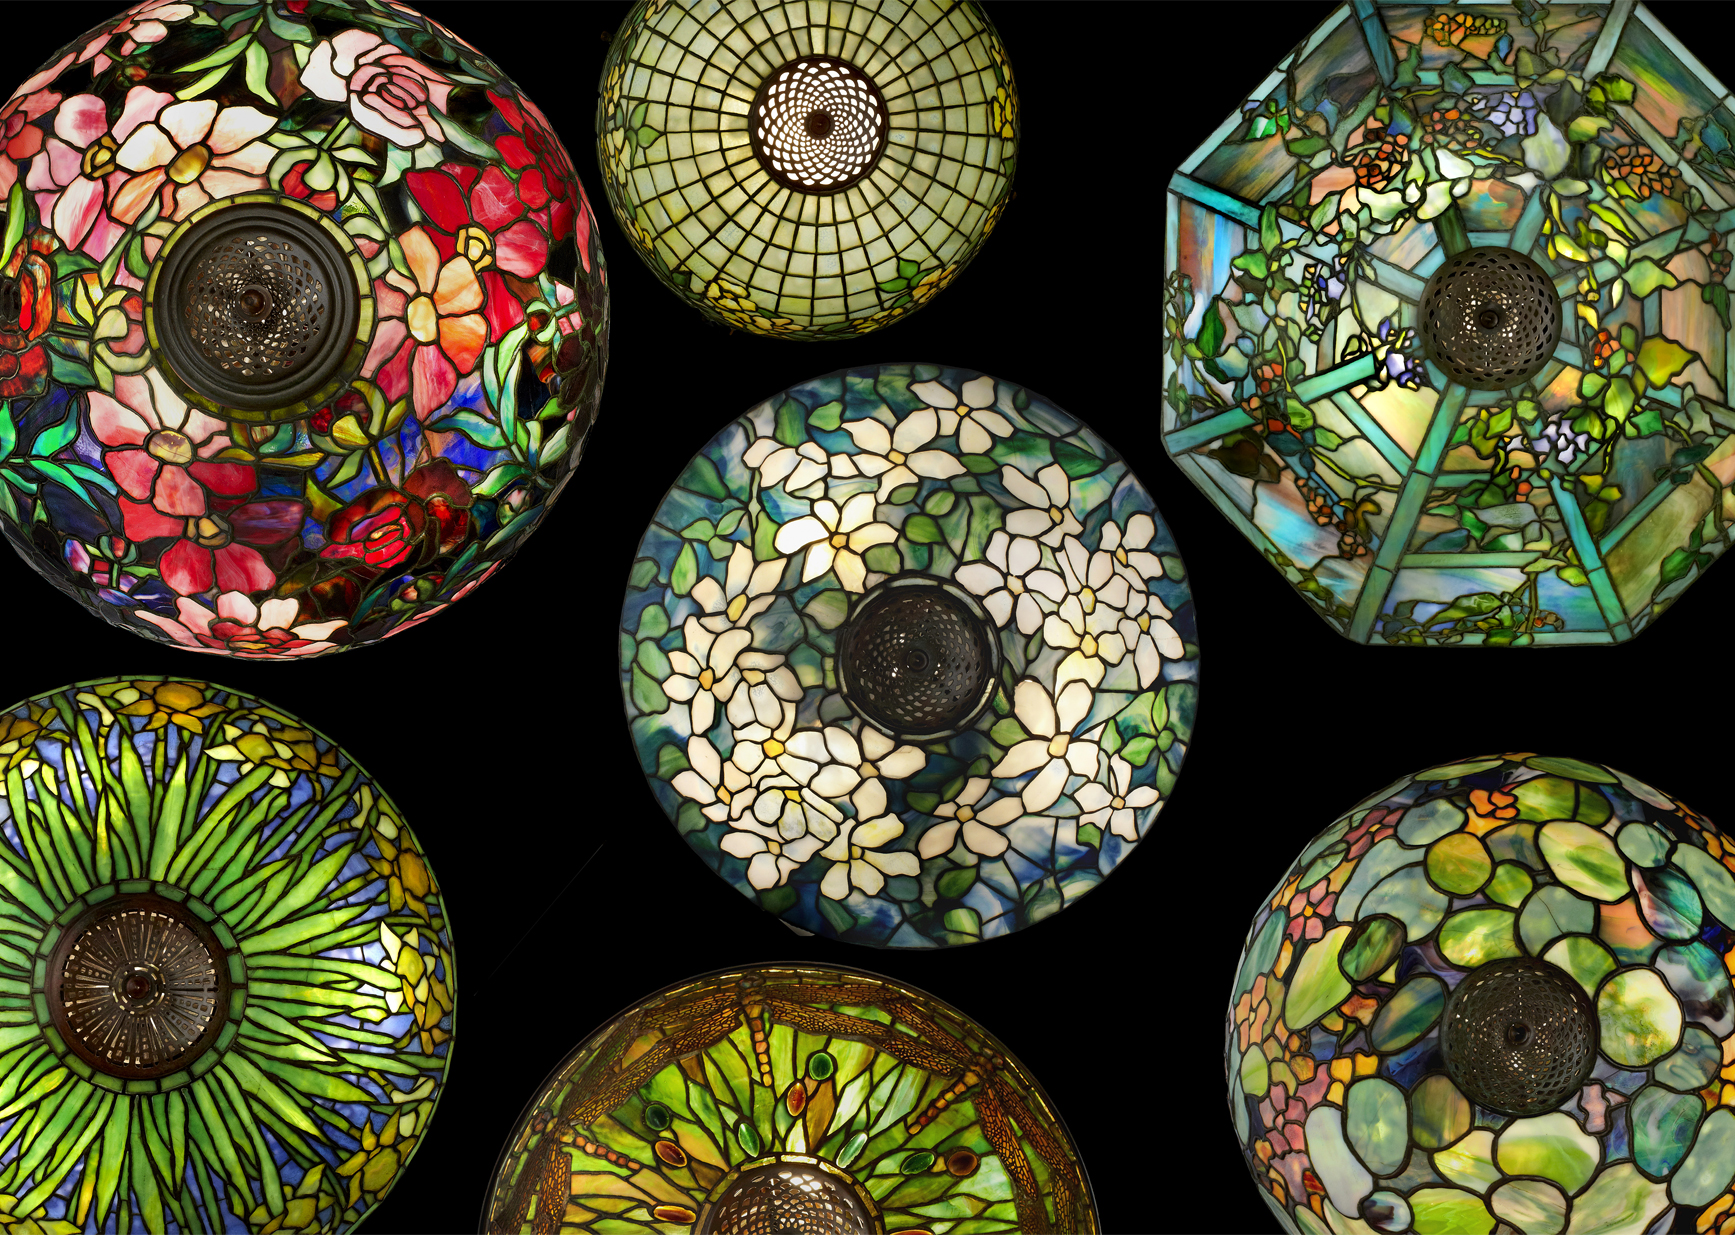 Exhibition of Tiffany Glass Sparkles at the Delaware Art Museum ...